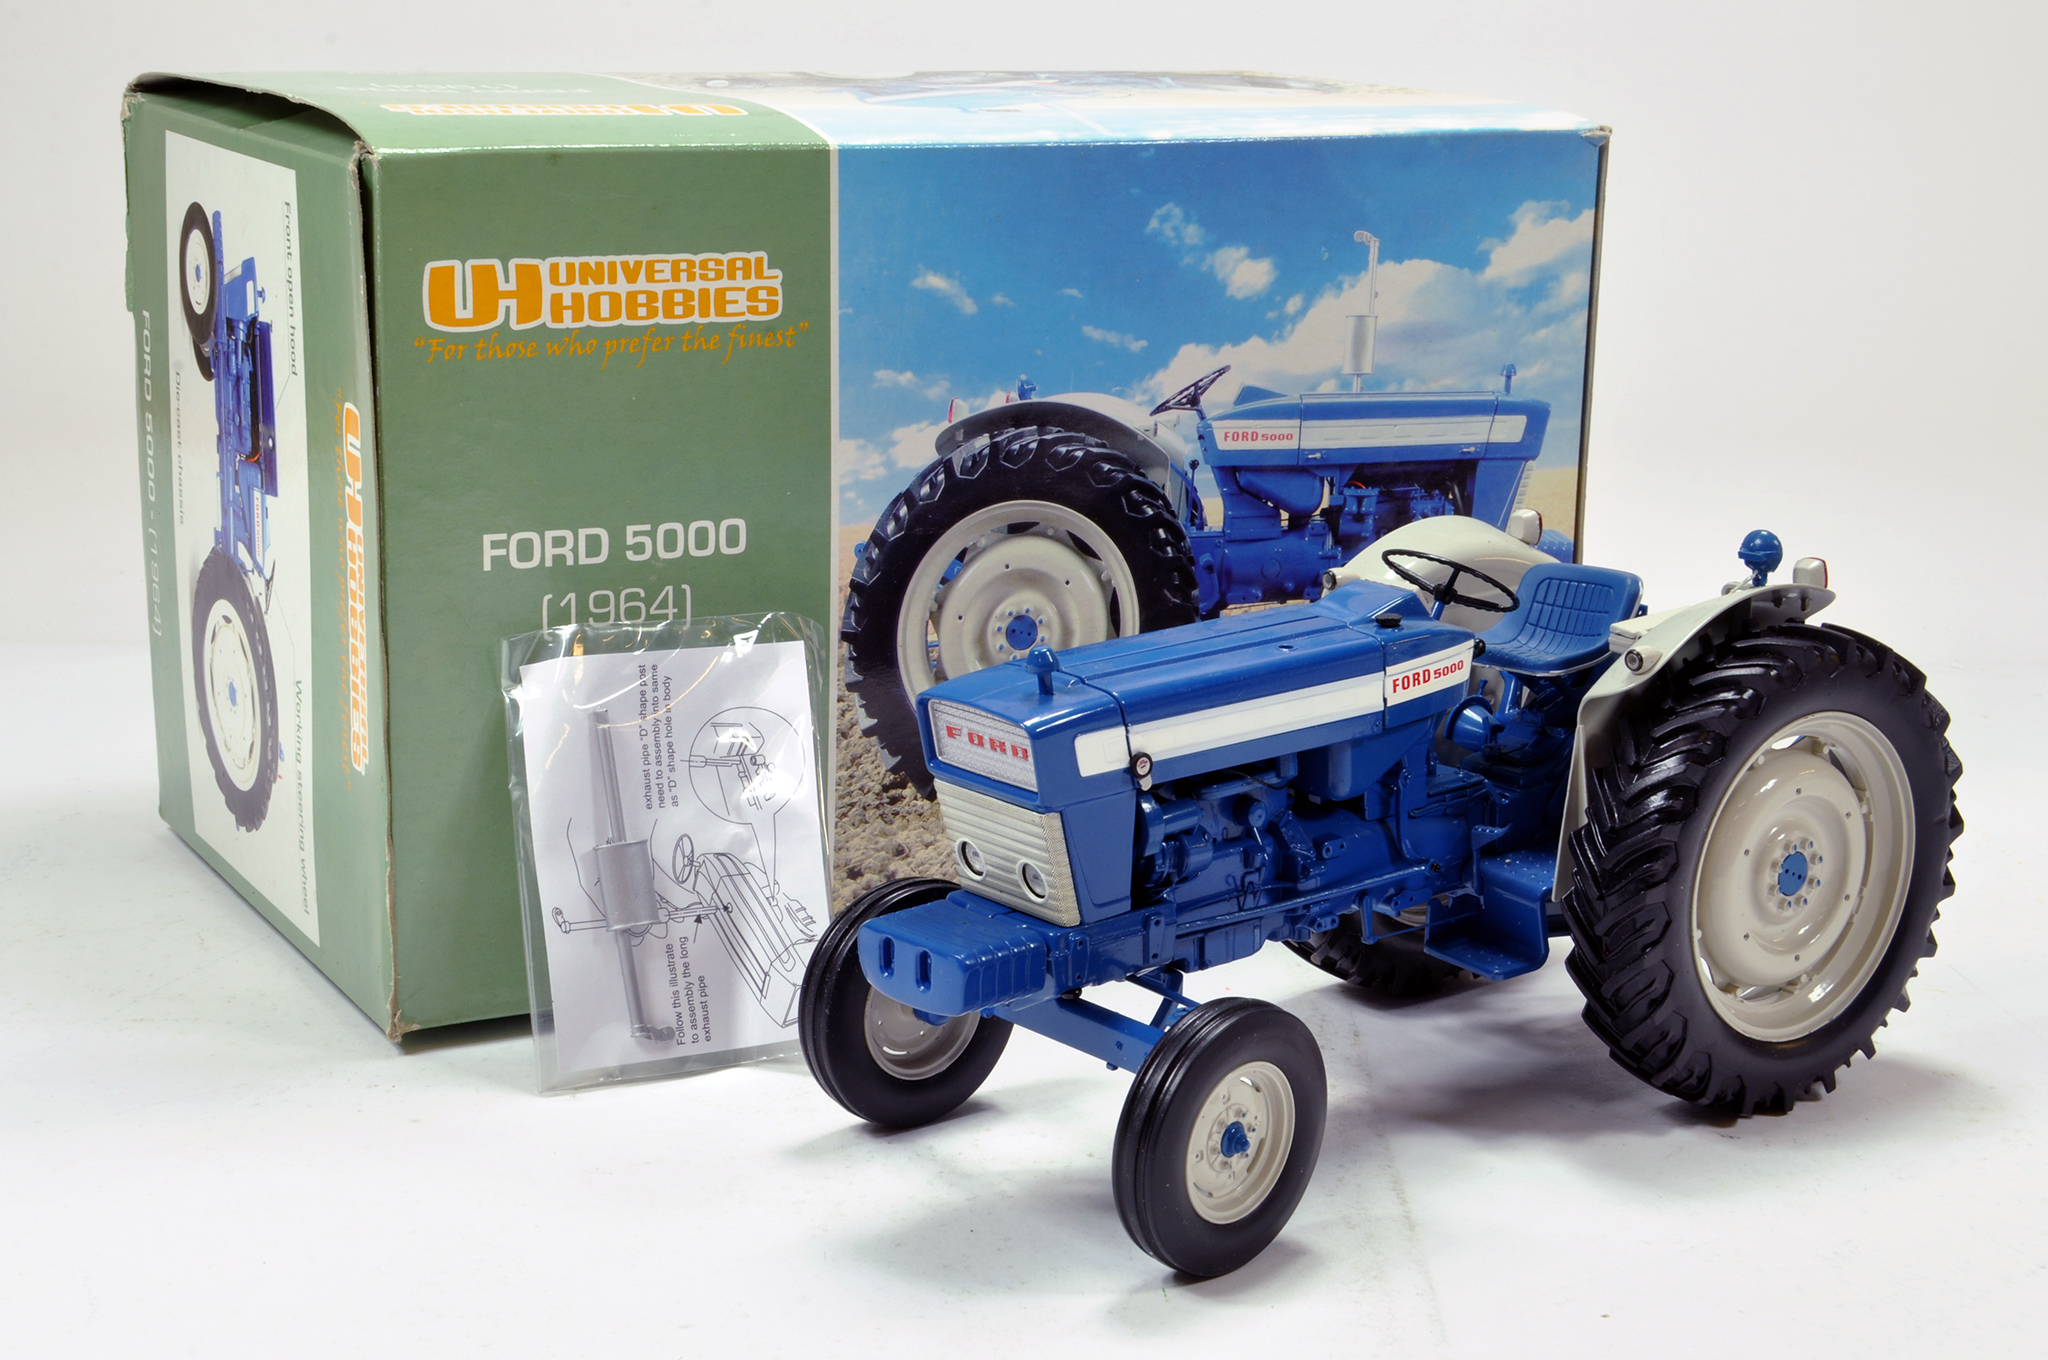 Universal hobbies 1/16 Ford 5000 tractor from 1964. Generally excellent in box.